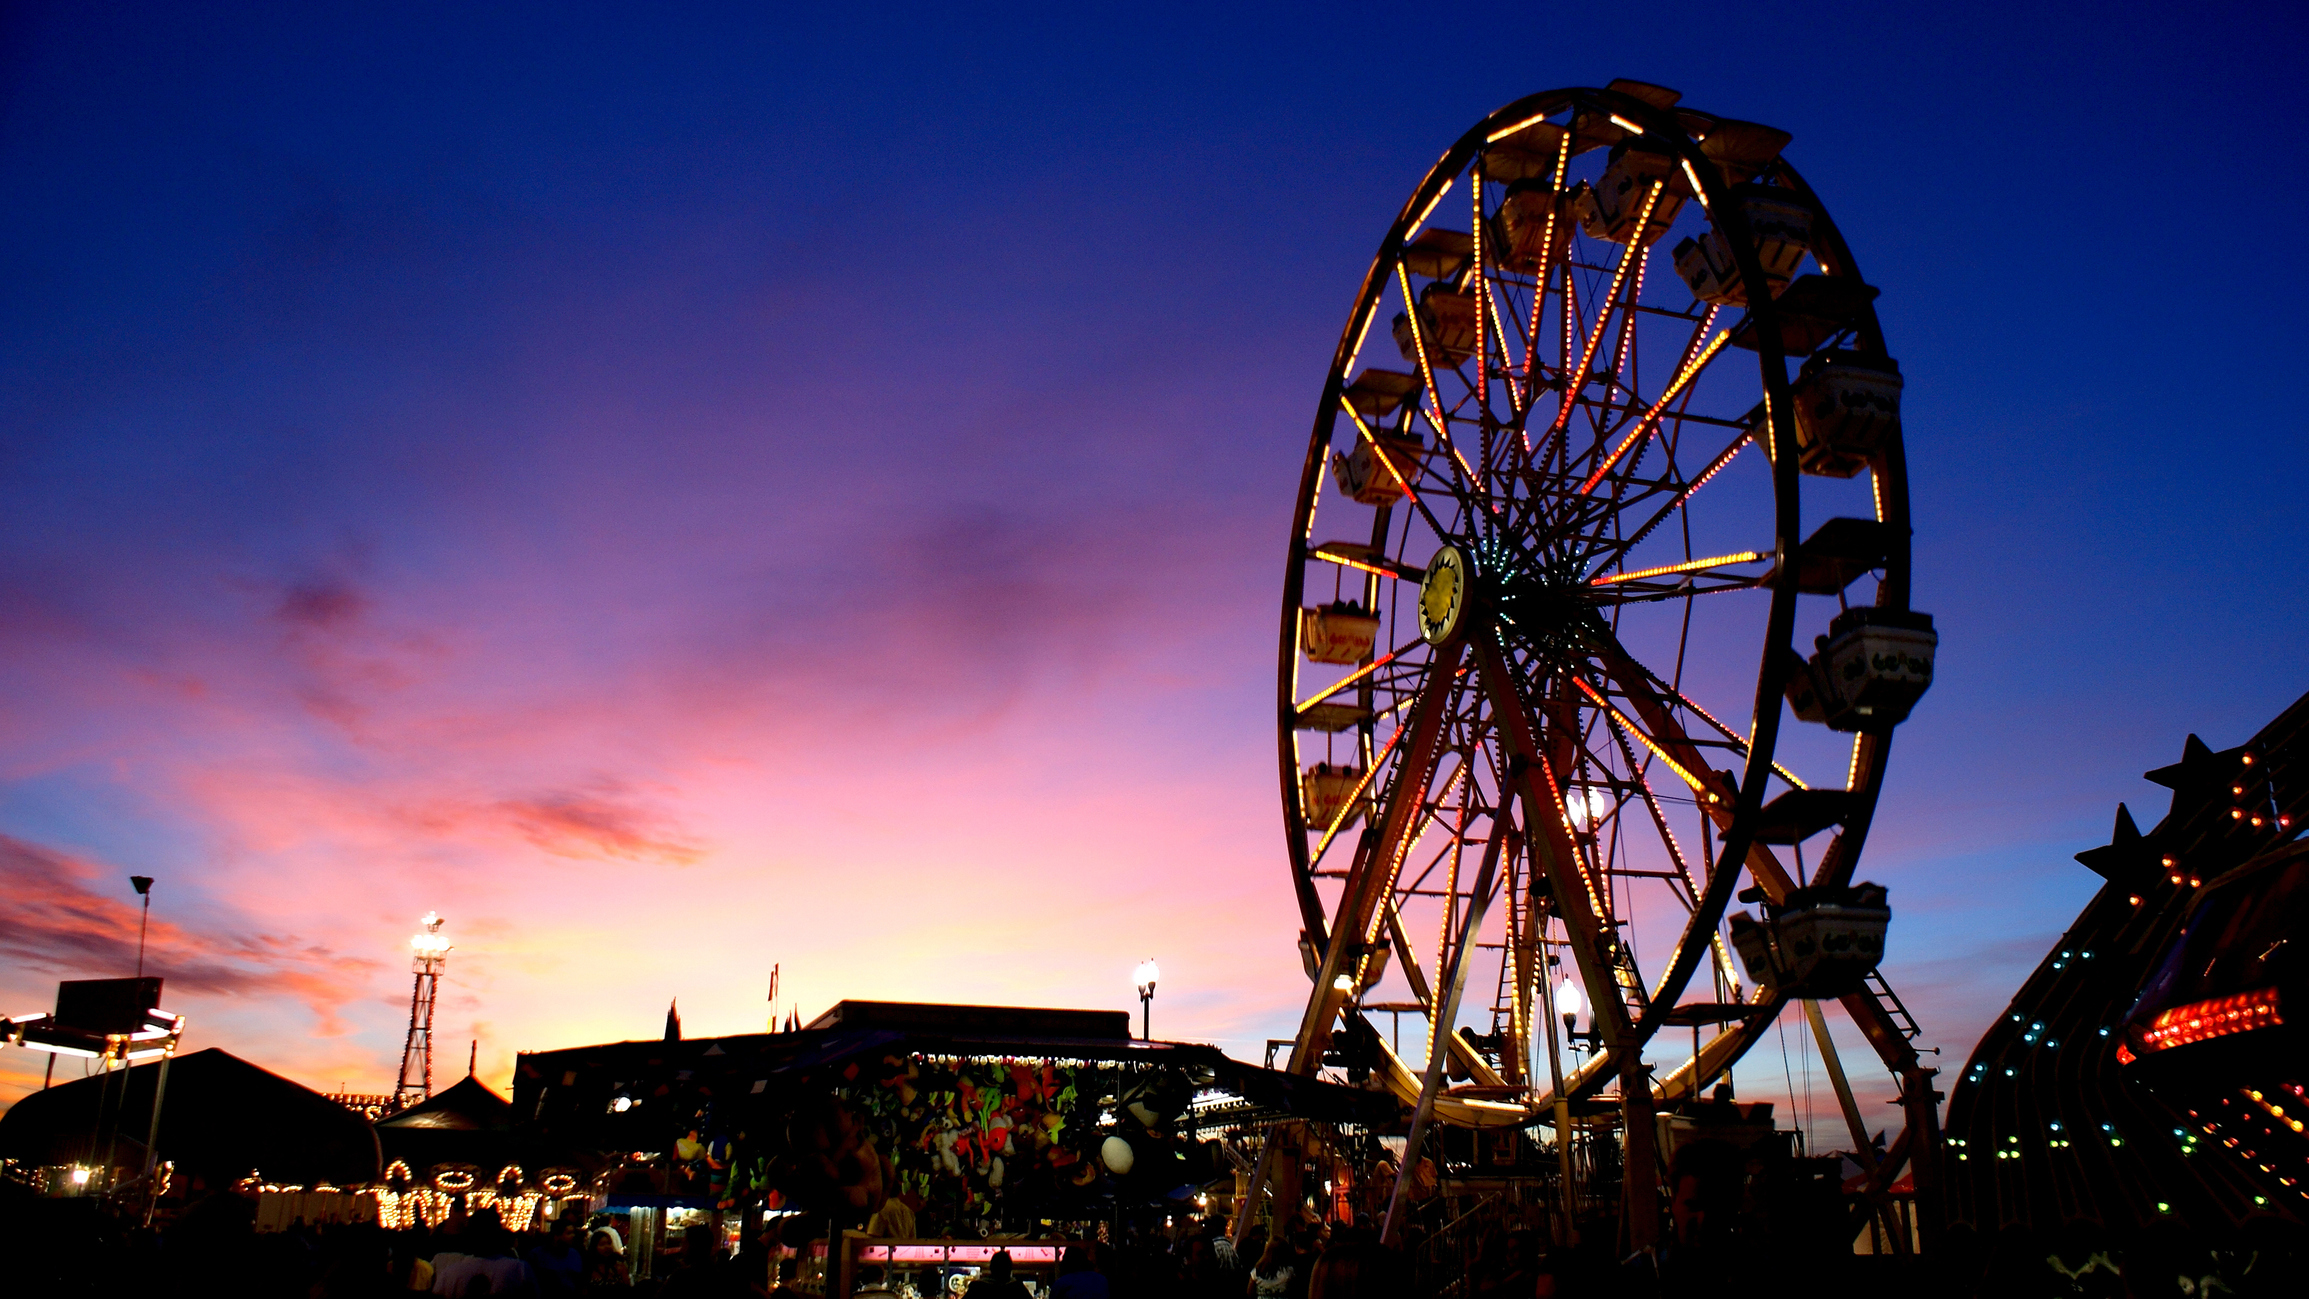 State Fairground Farris Wheel Ride with Multicolored Lights Spinning at Sunset along with Carnival Games, Carnival Rides in image. (Photo: iStock - Clayton Piatt)